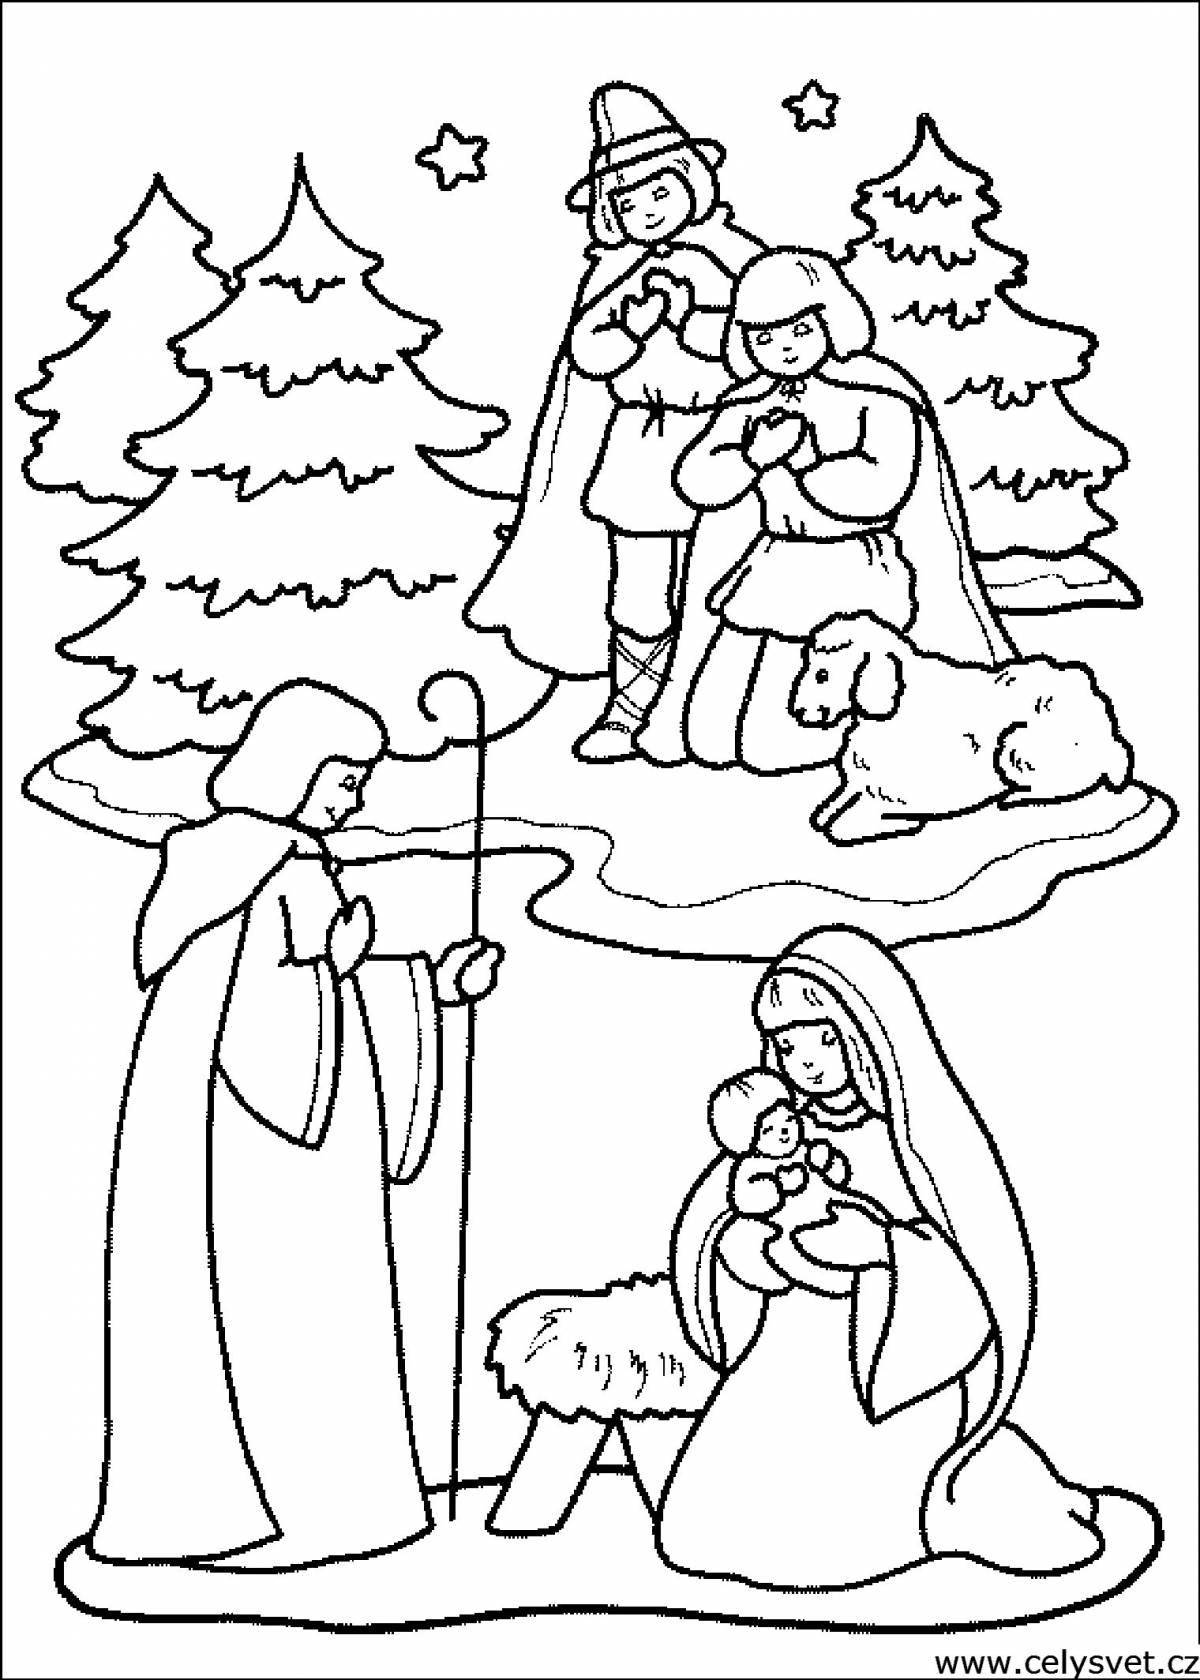 Great Christmas coloring book for 5-6 year olds